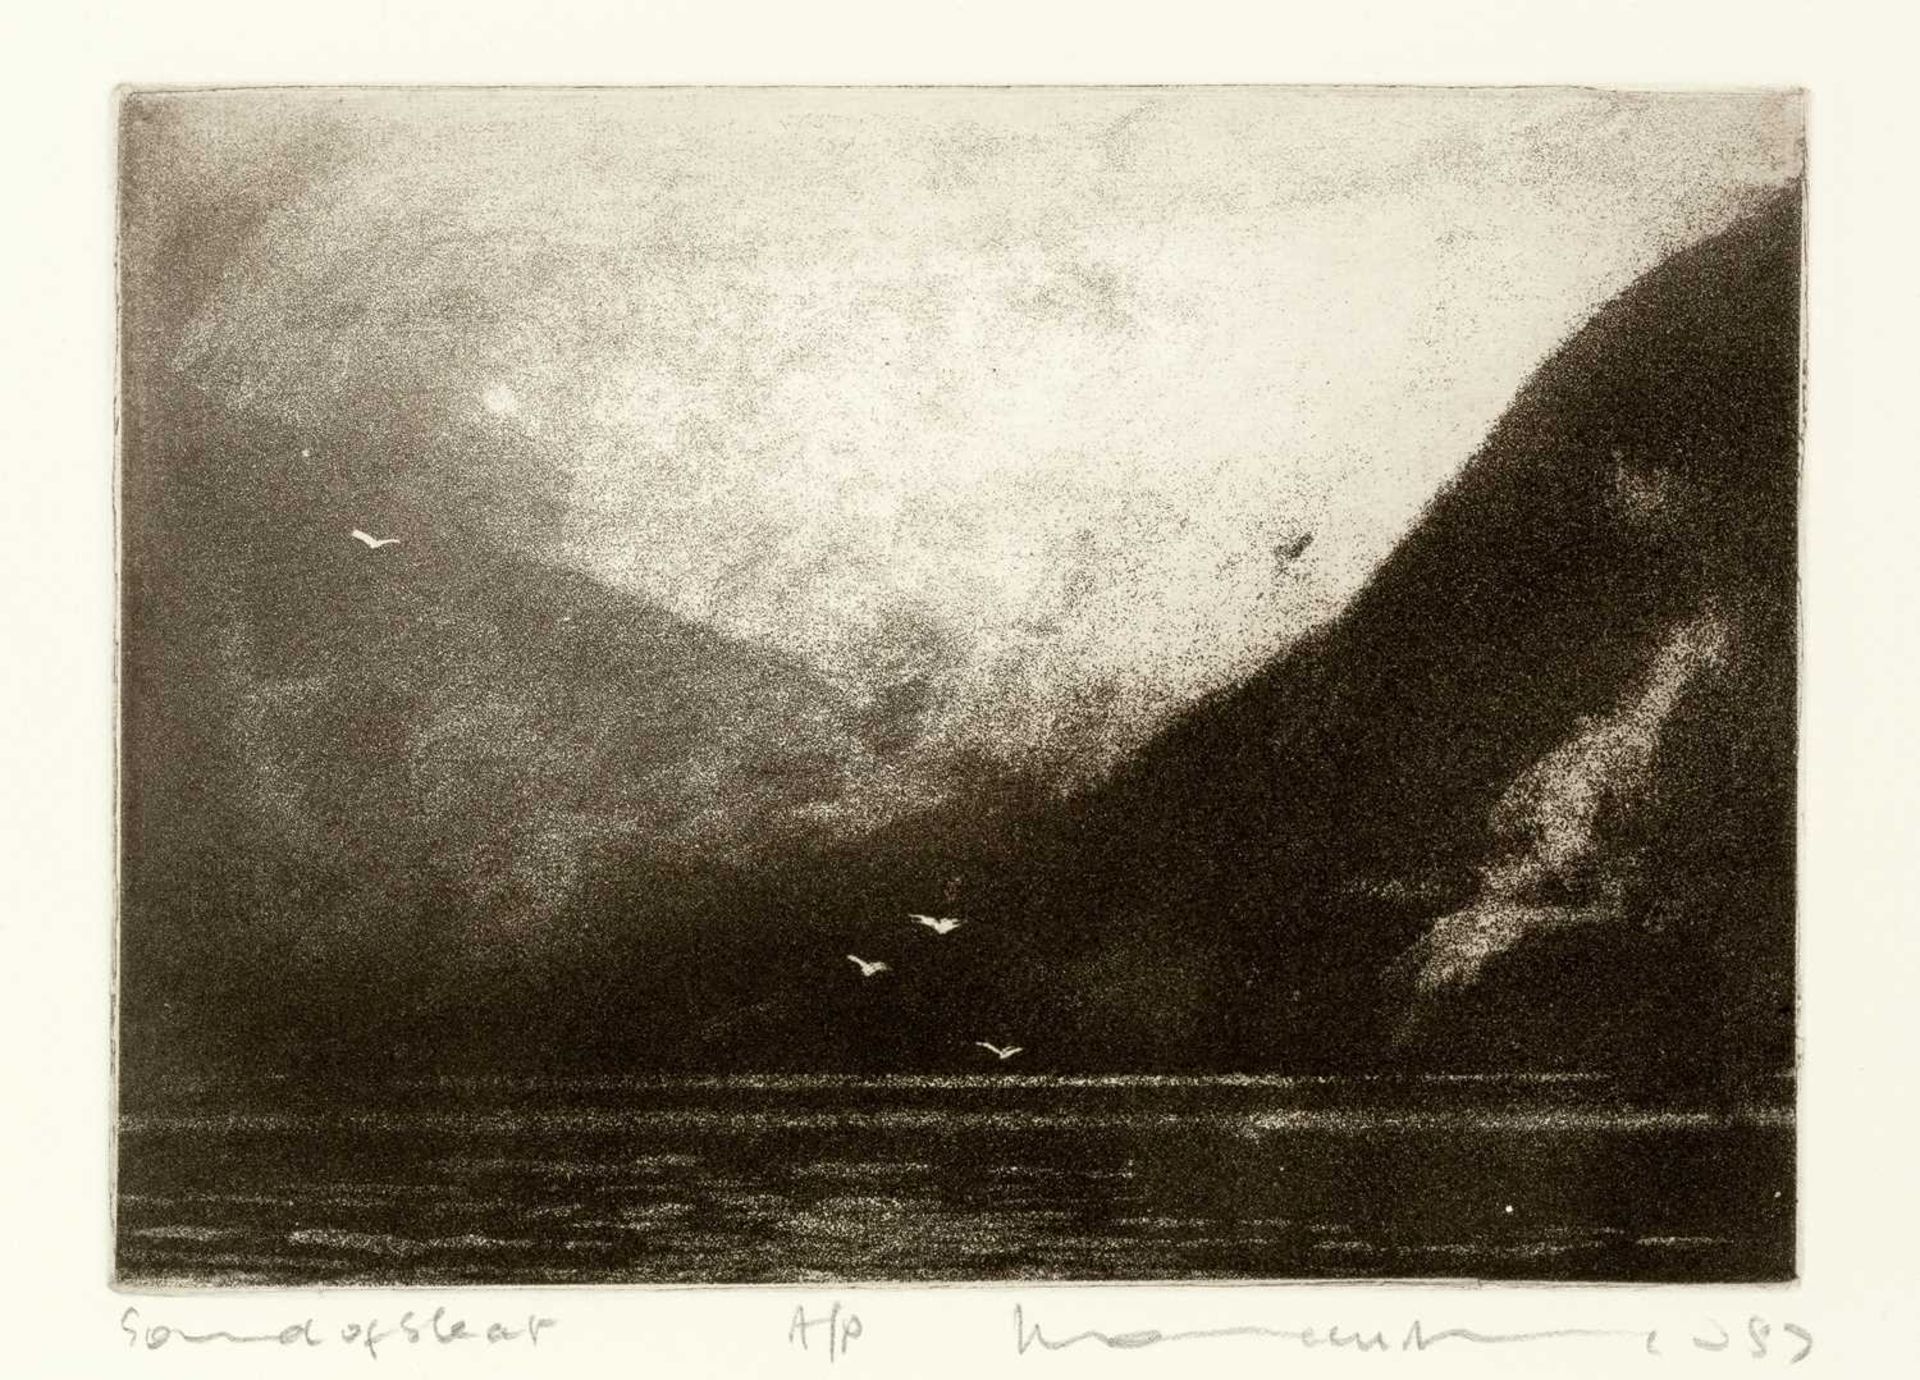 Norman Ackroyd (b.1938) Sound of Sleet, 1987 artist's proof, signed, titled, and dated in pencil (in